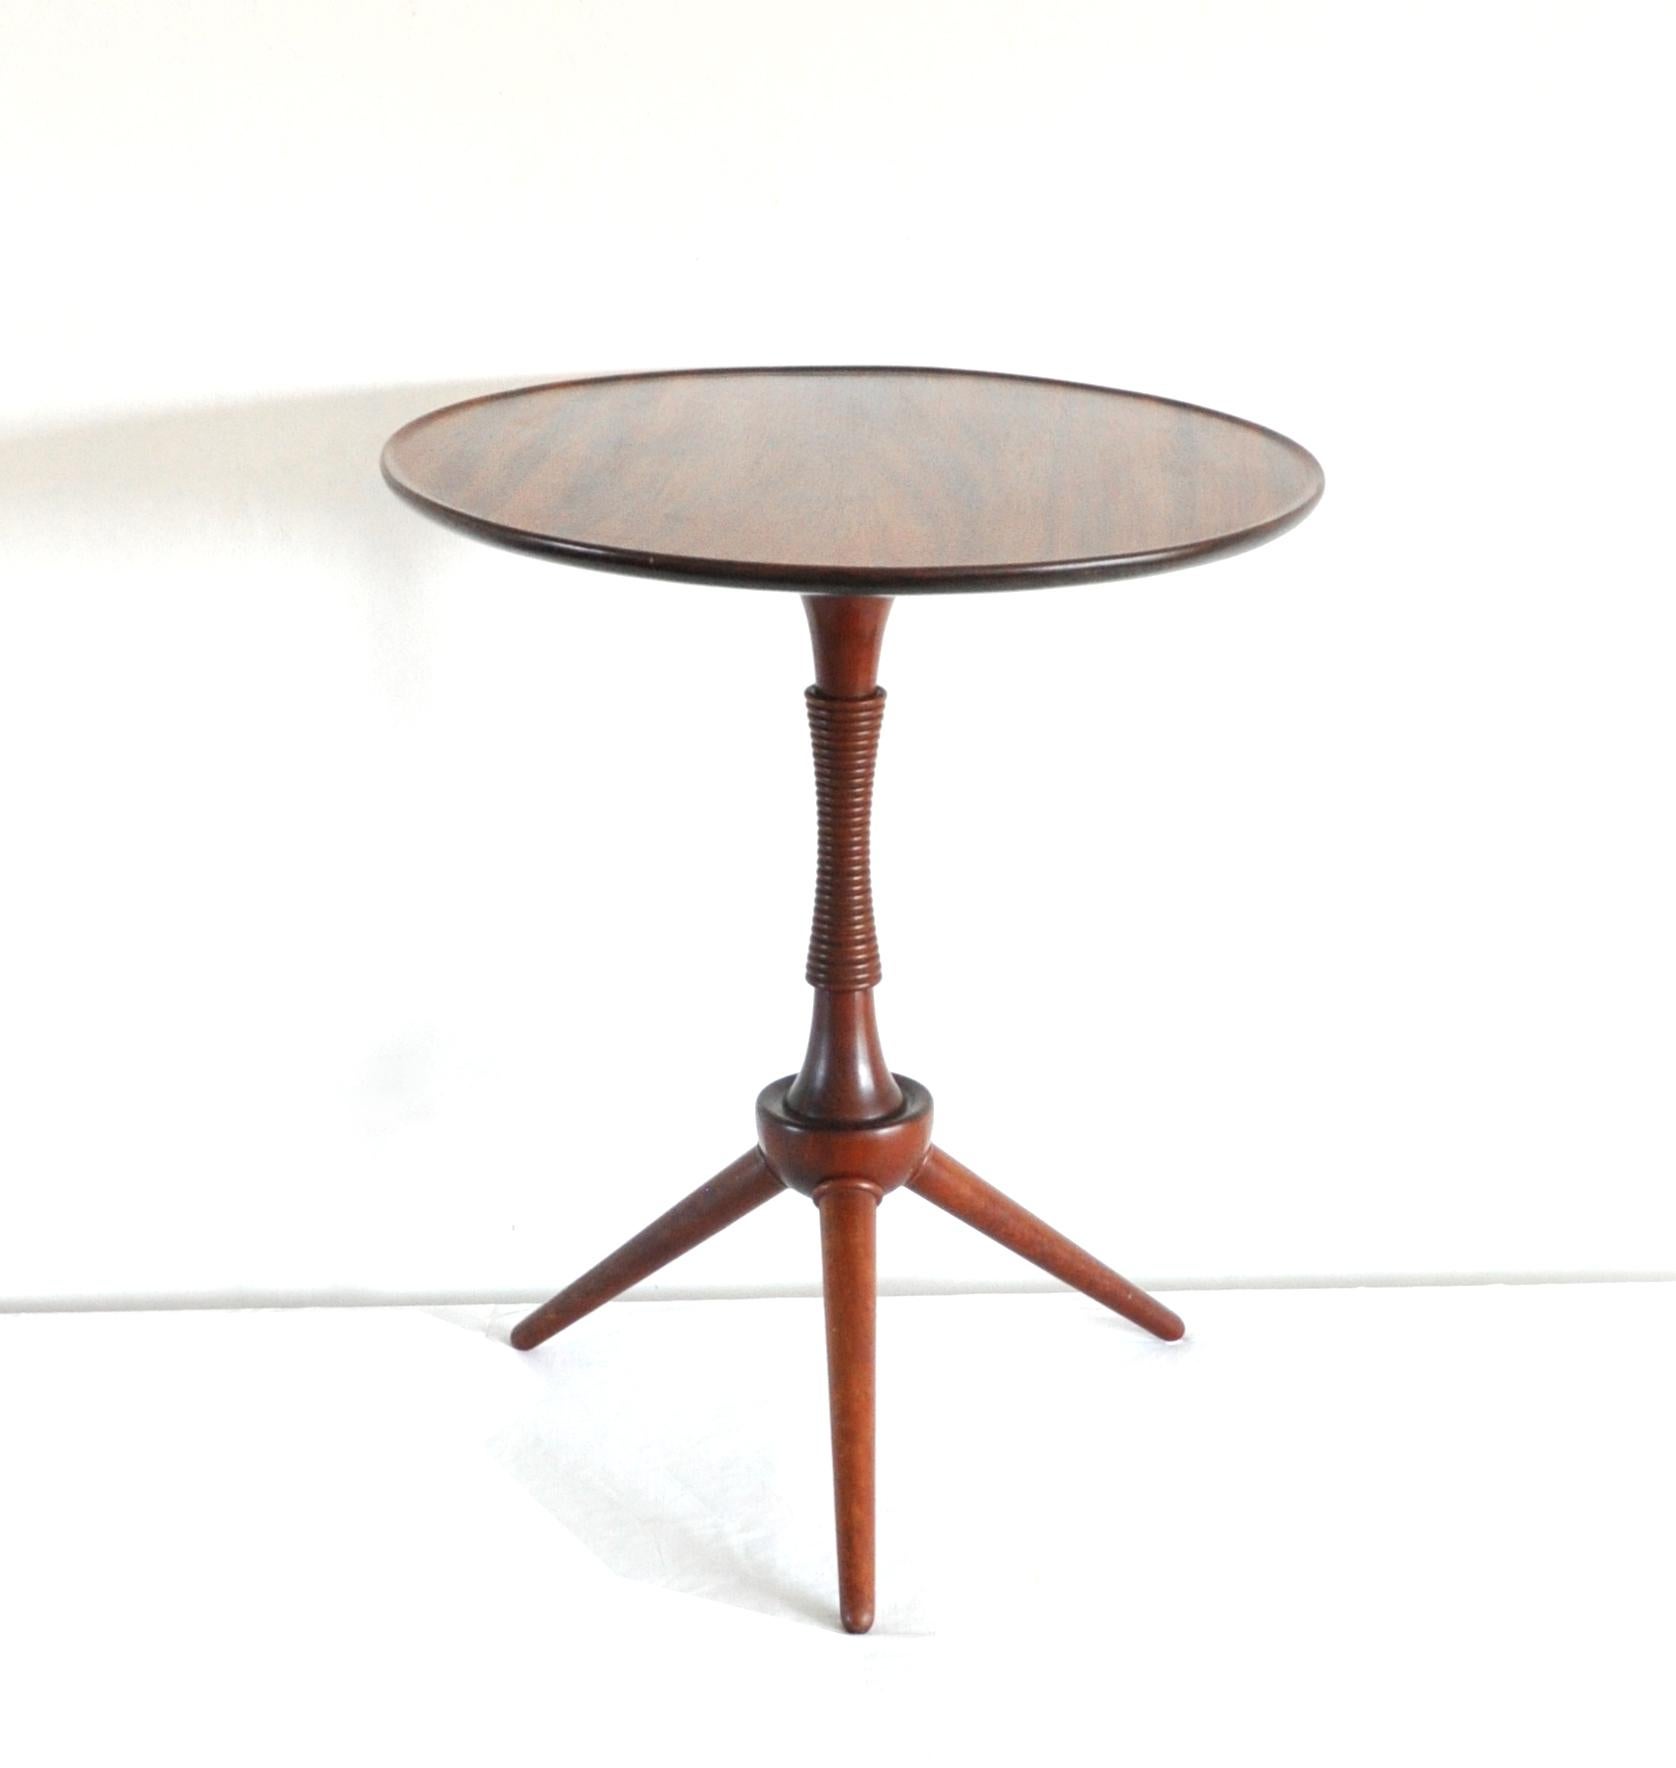 Side Table in solid mahogany with elegant details designed by cabinetmaker Frits Henningsen. Made in Denmark in the 1940s.
Tabletop refurnished and lacquered , repair by our cabinetmaker, see the pictures.

Dimensions:
Diameter 45 cm
Height 53